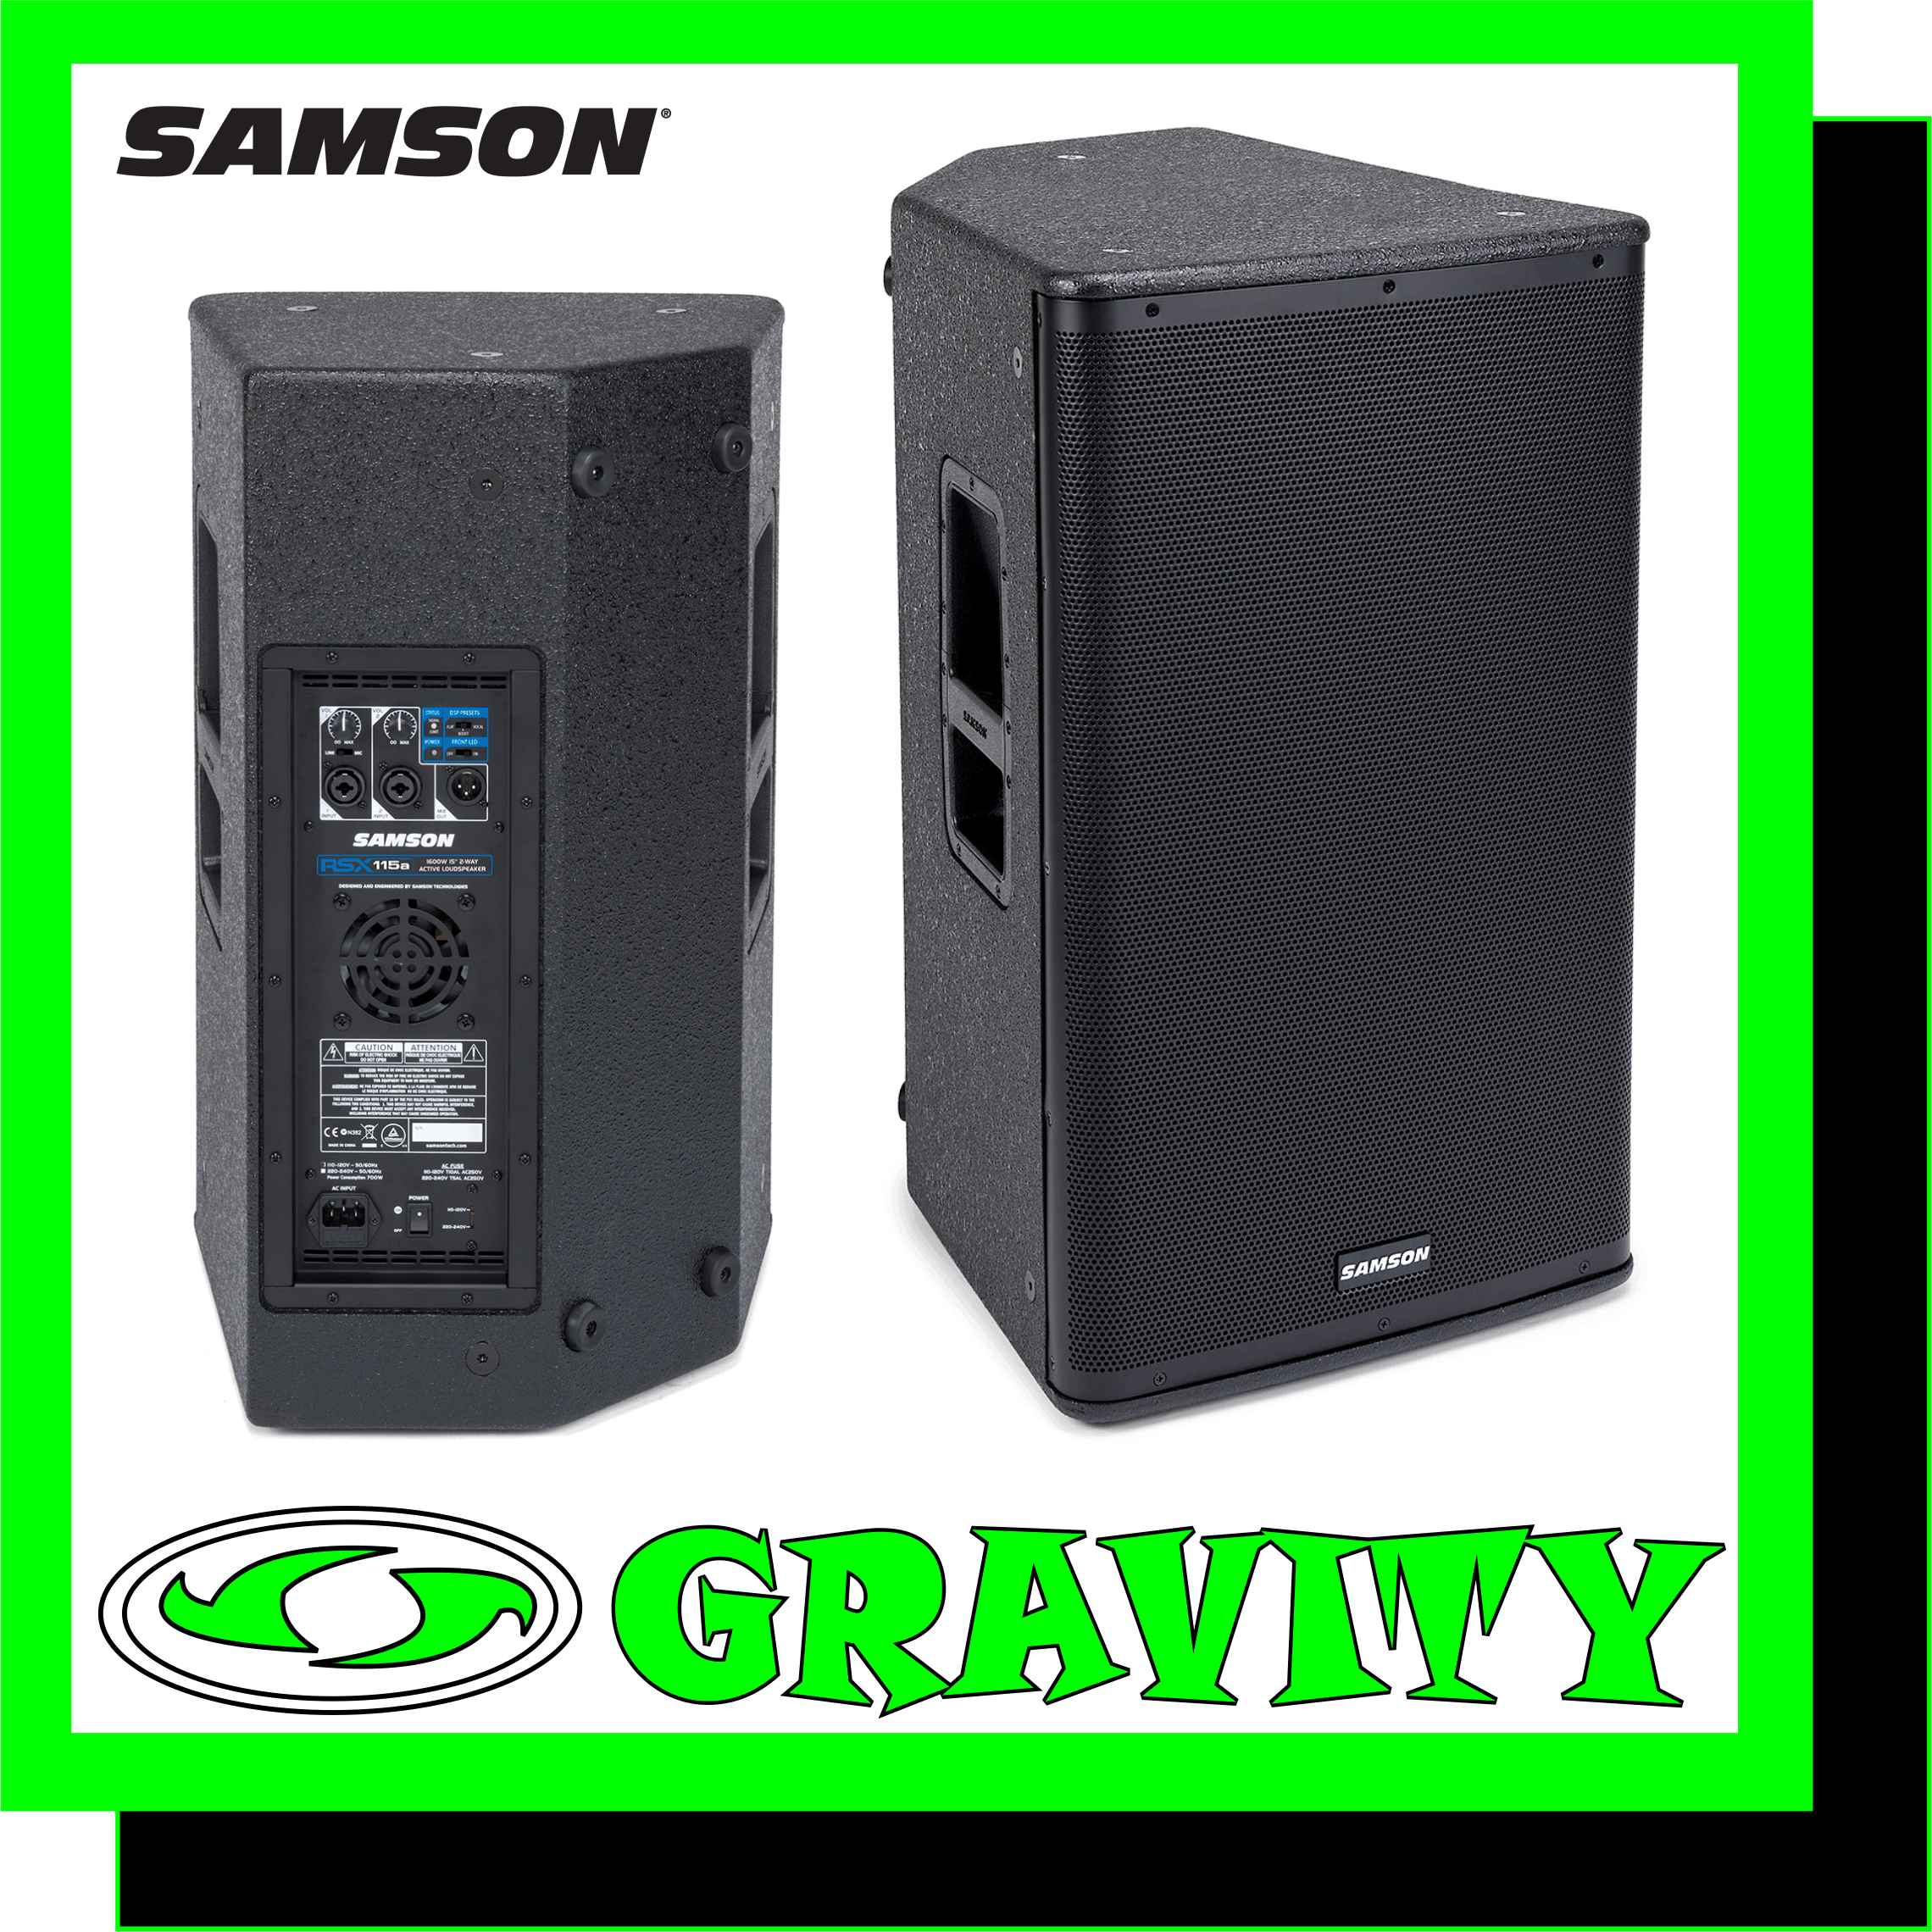 Place Of Power. Samson's RSX115A 2-Way Active Loudspeaker delivers 1,600 watts of output power and impeccable sound quality. The RSX115A combines 9-layer plywood cabinet construction with ultra-efficient Class D power and advanced Digital Signal Processing technology to provide unrivaled performance to live sound professionals.  Featuring Samson's proprietary R.A.M.P. (Reactive Alignment, Maximum Protection) DSP technology, the RSX115A employs Reactive Alignment filters to enhance transducer performance. The DSP also offers Maximum Protection to the speaker's components via thermal and over current sensors. Along with a 15" low frequency driver, the speaker features a single 1.75" PETP Celestion® compression driver mounted within a dispersion efficient waveguide, adding a wide and balanced sound field to the RSX design.  In addition to its ultra-durable cabinet construction, the RSX115A features a perforated steel grill, 1 3/8" pole mount receptacle and two rubberized carry handles. Connectivity includes two XLR-1/4" combo input channels with a selectable Mic/Line switch on Channel 1. Additionally, an XLR Link output is available for stereo operation. The speaker performs equally as well as a floor monitor or main system speaker. For situations that require permanent speaker installation, the RSX115A is furnished with twelve M10 (10mm) fly points.  -Lightweight, Class D 2-way active loudspeakers -1,600 watts of output power -Peak SPL of 133dB -9-layer plywood cabinet construction -Samson’s R.A.M.P. DSP technology -15" low frequency driver -1.75" PETP Celestion® compression driver -Two XLR-1/4" combo input channels -Floor monitor positioning option -1 3/8" pole mount receptacle -Twelve M10 (10mm) fly points -Rubberized carry handles -Perforated steel grill -Durable black, textured paint finish